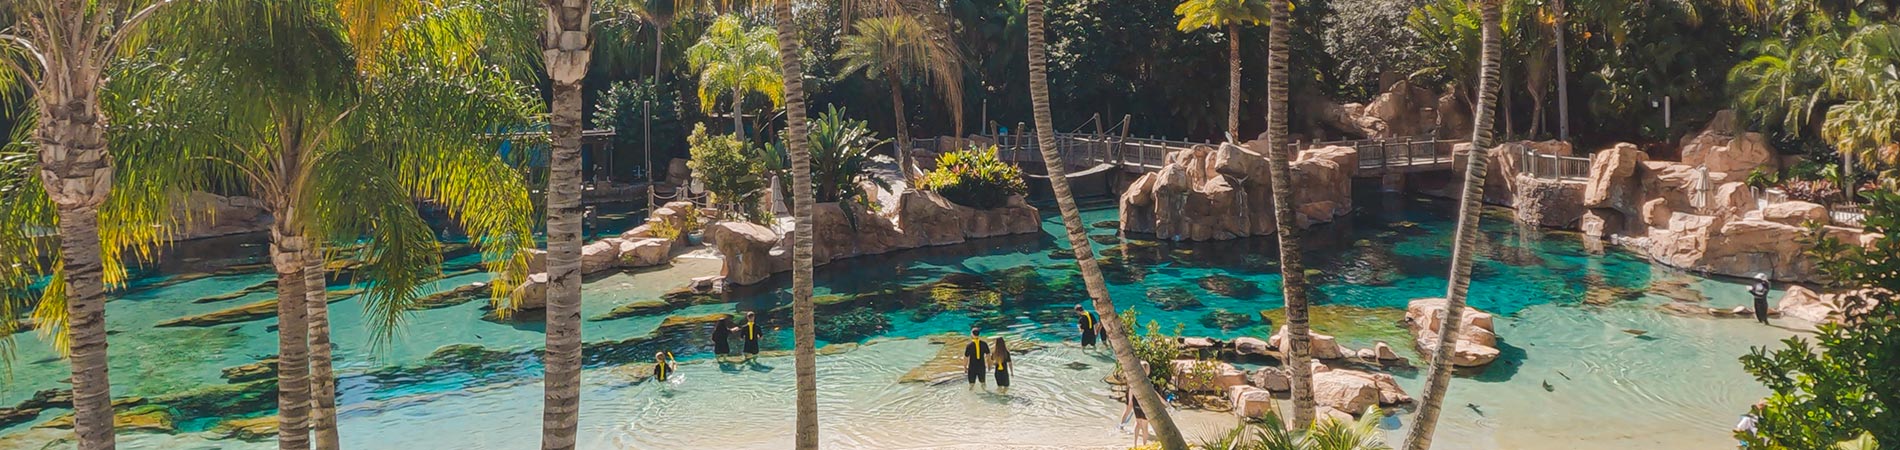 The Grand Reef at Discovery Cove Orlando